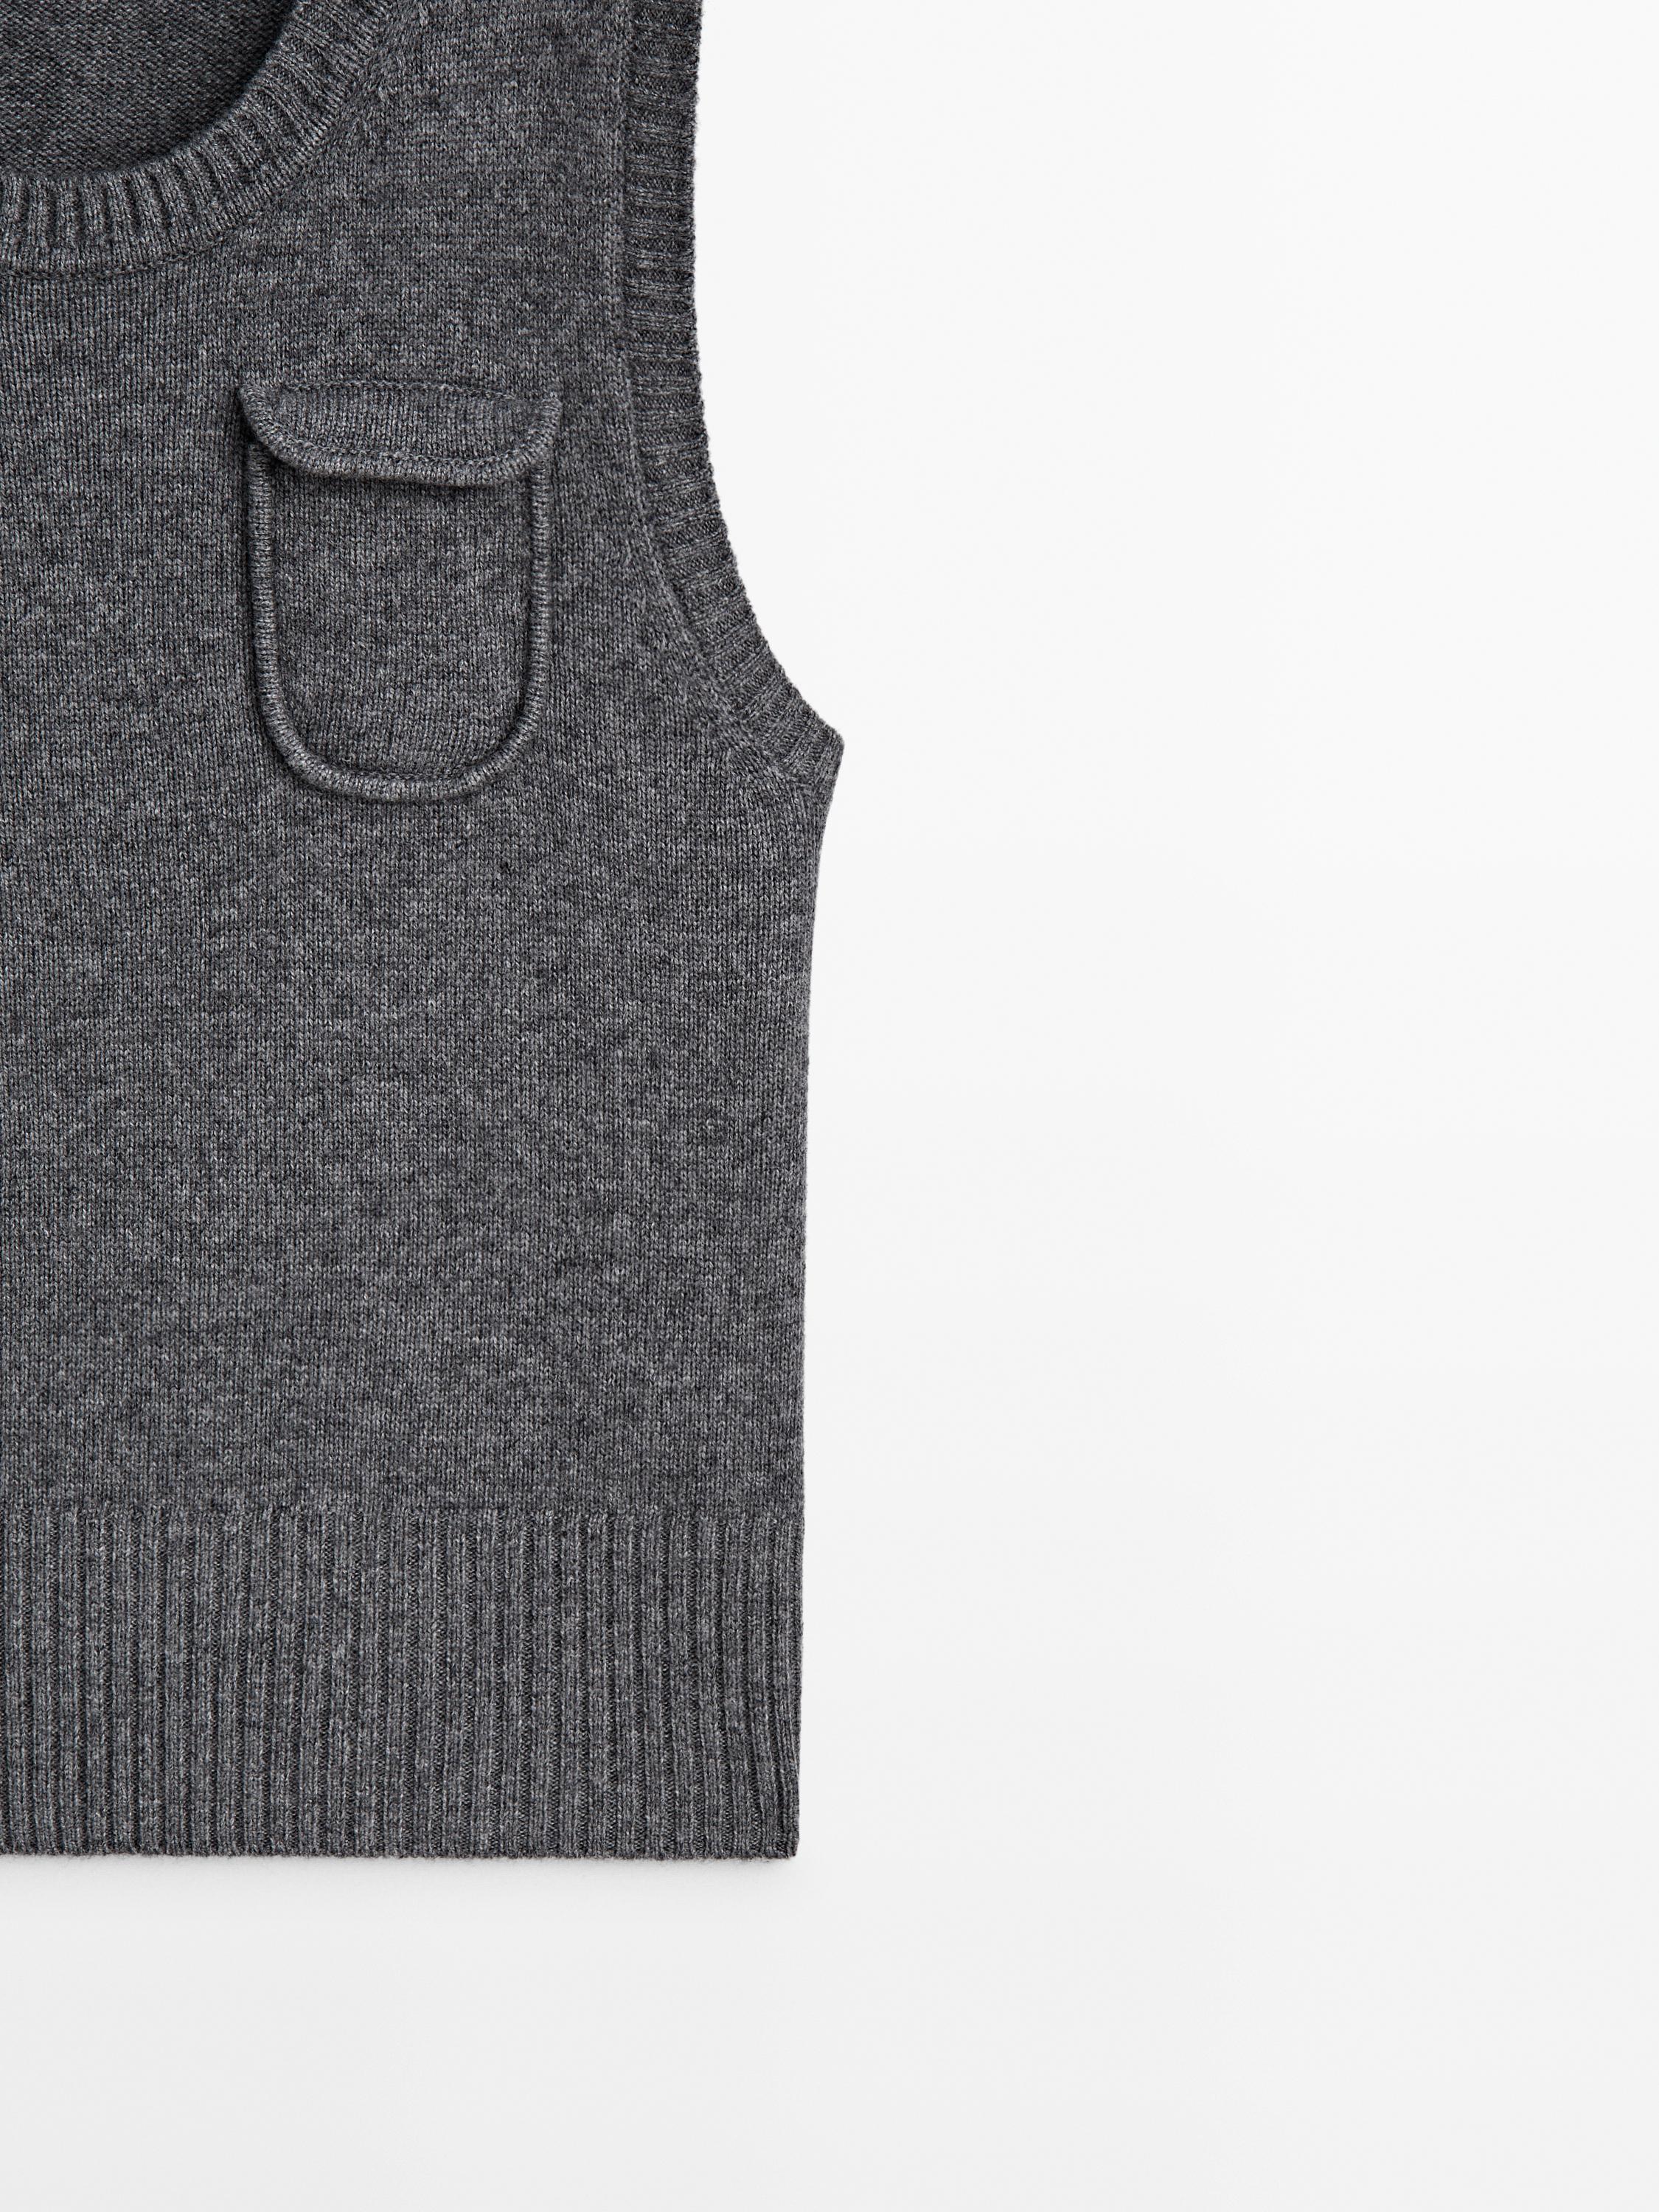 Wool blend knit vest with pockets - Mid-gray | ZARA United States